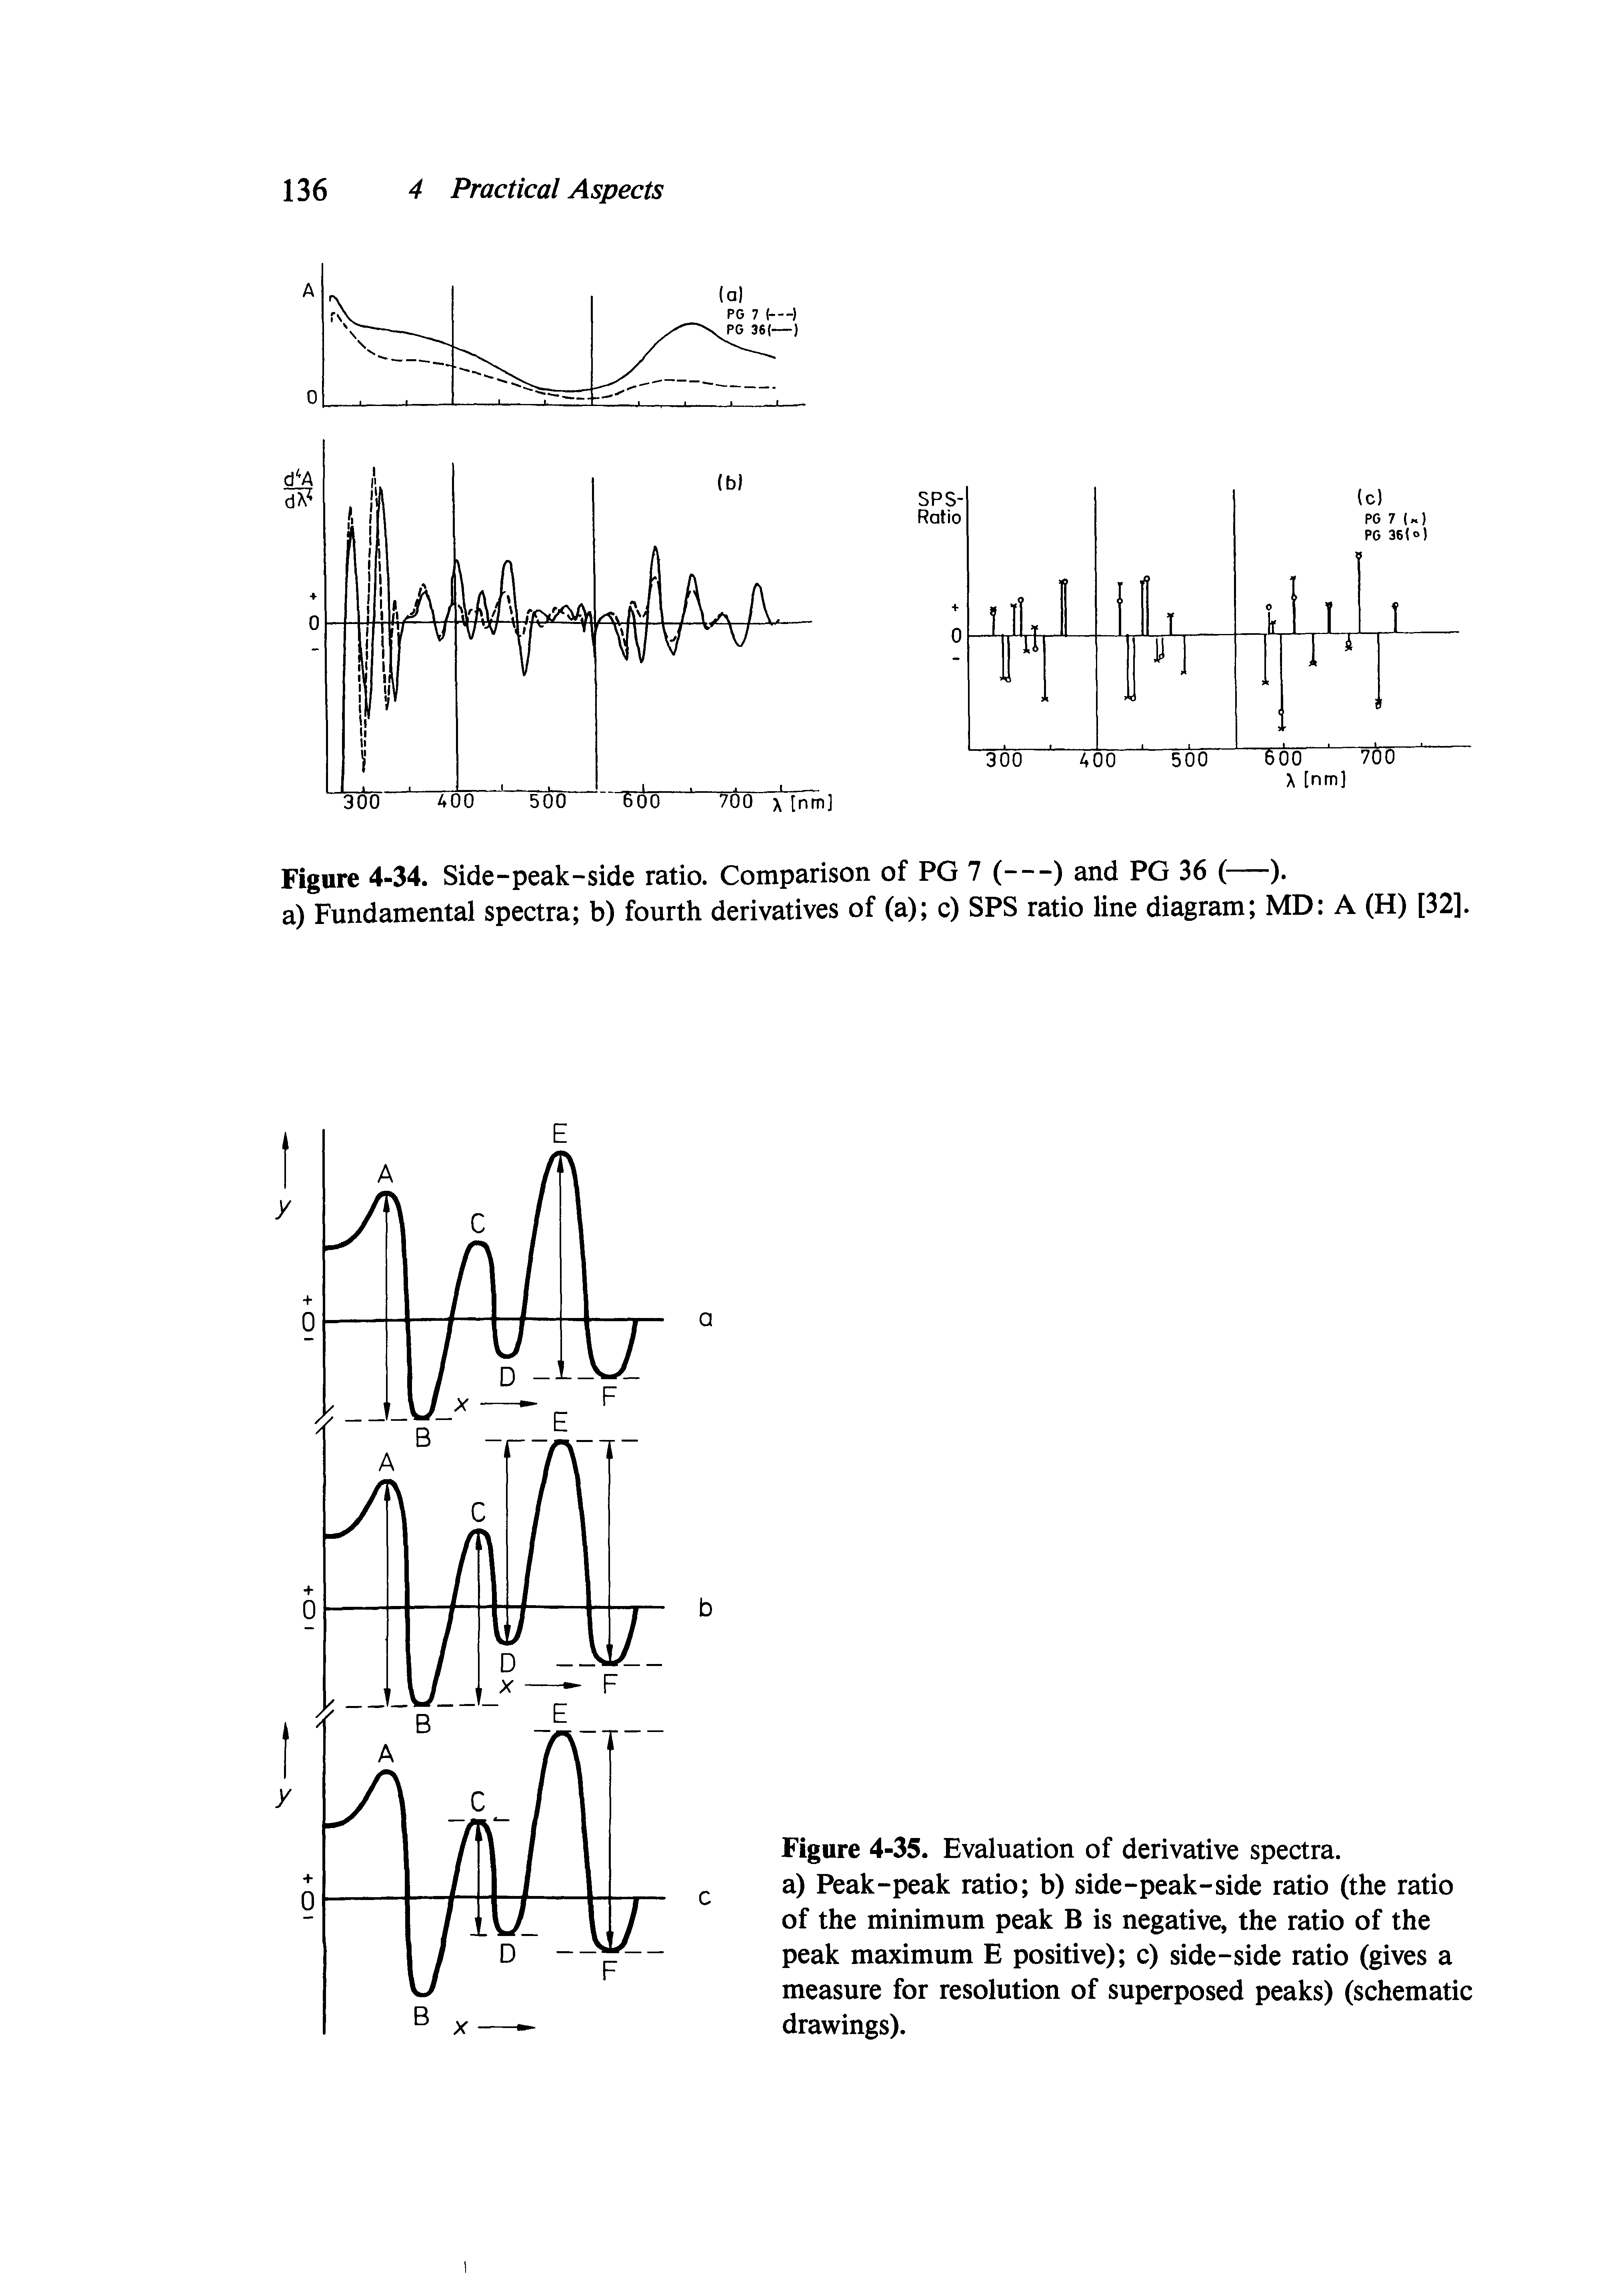 Figure 4-35. Evaluation of derivative spectra, a) Peak-peak ratio b) side-peak-side ratio (the ratio of the minimum peak B is negative, the ratio of the peak maximum E positive) c) side-side ratio (gives a measure for resolution of superposed peaks) (schematic drawings).